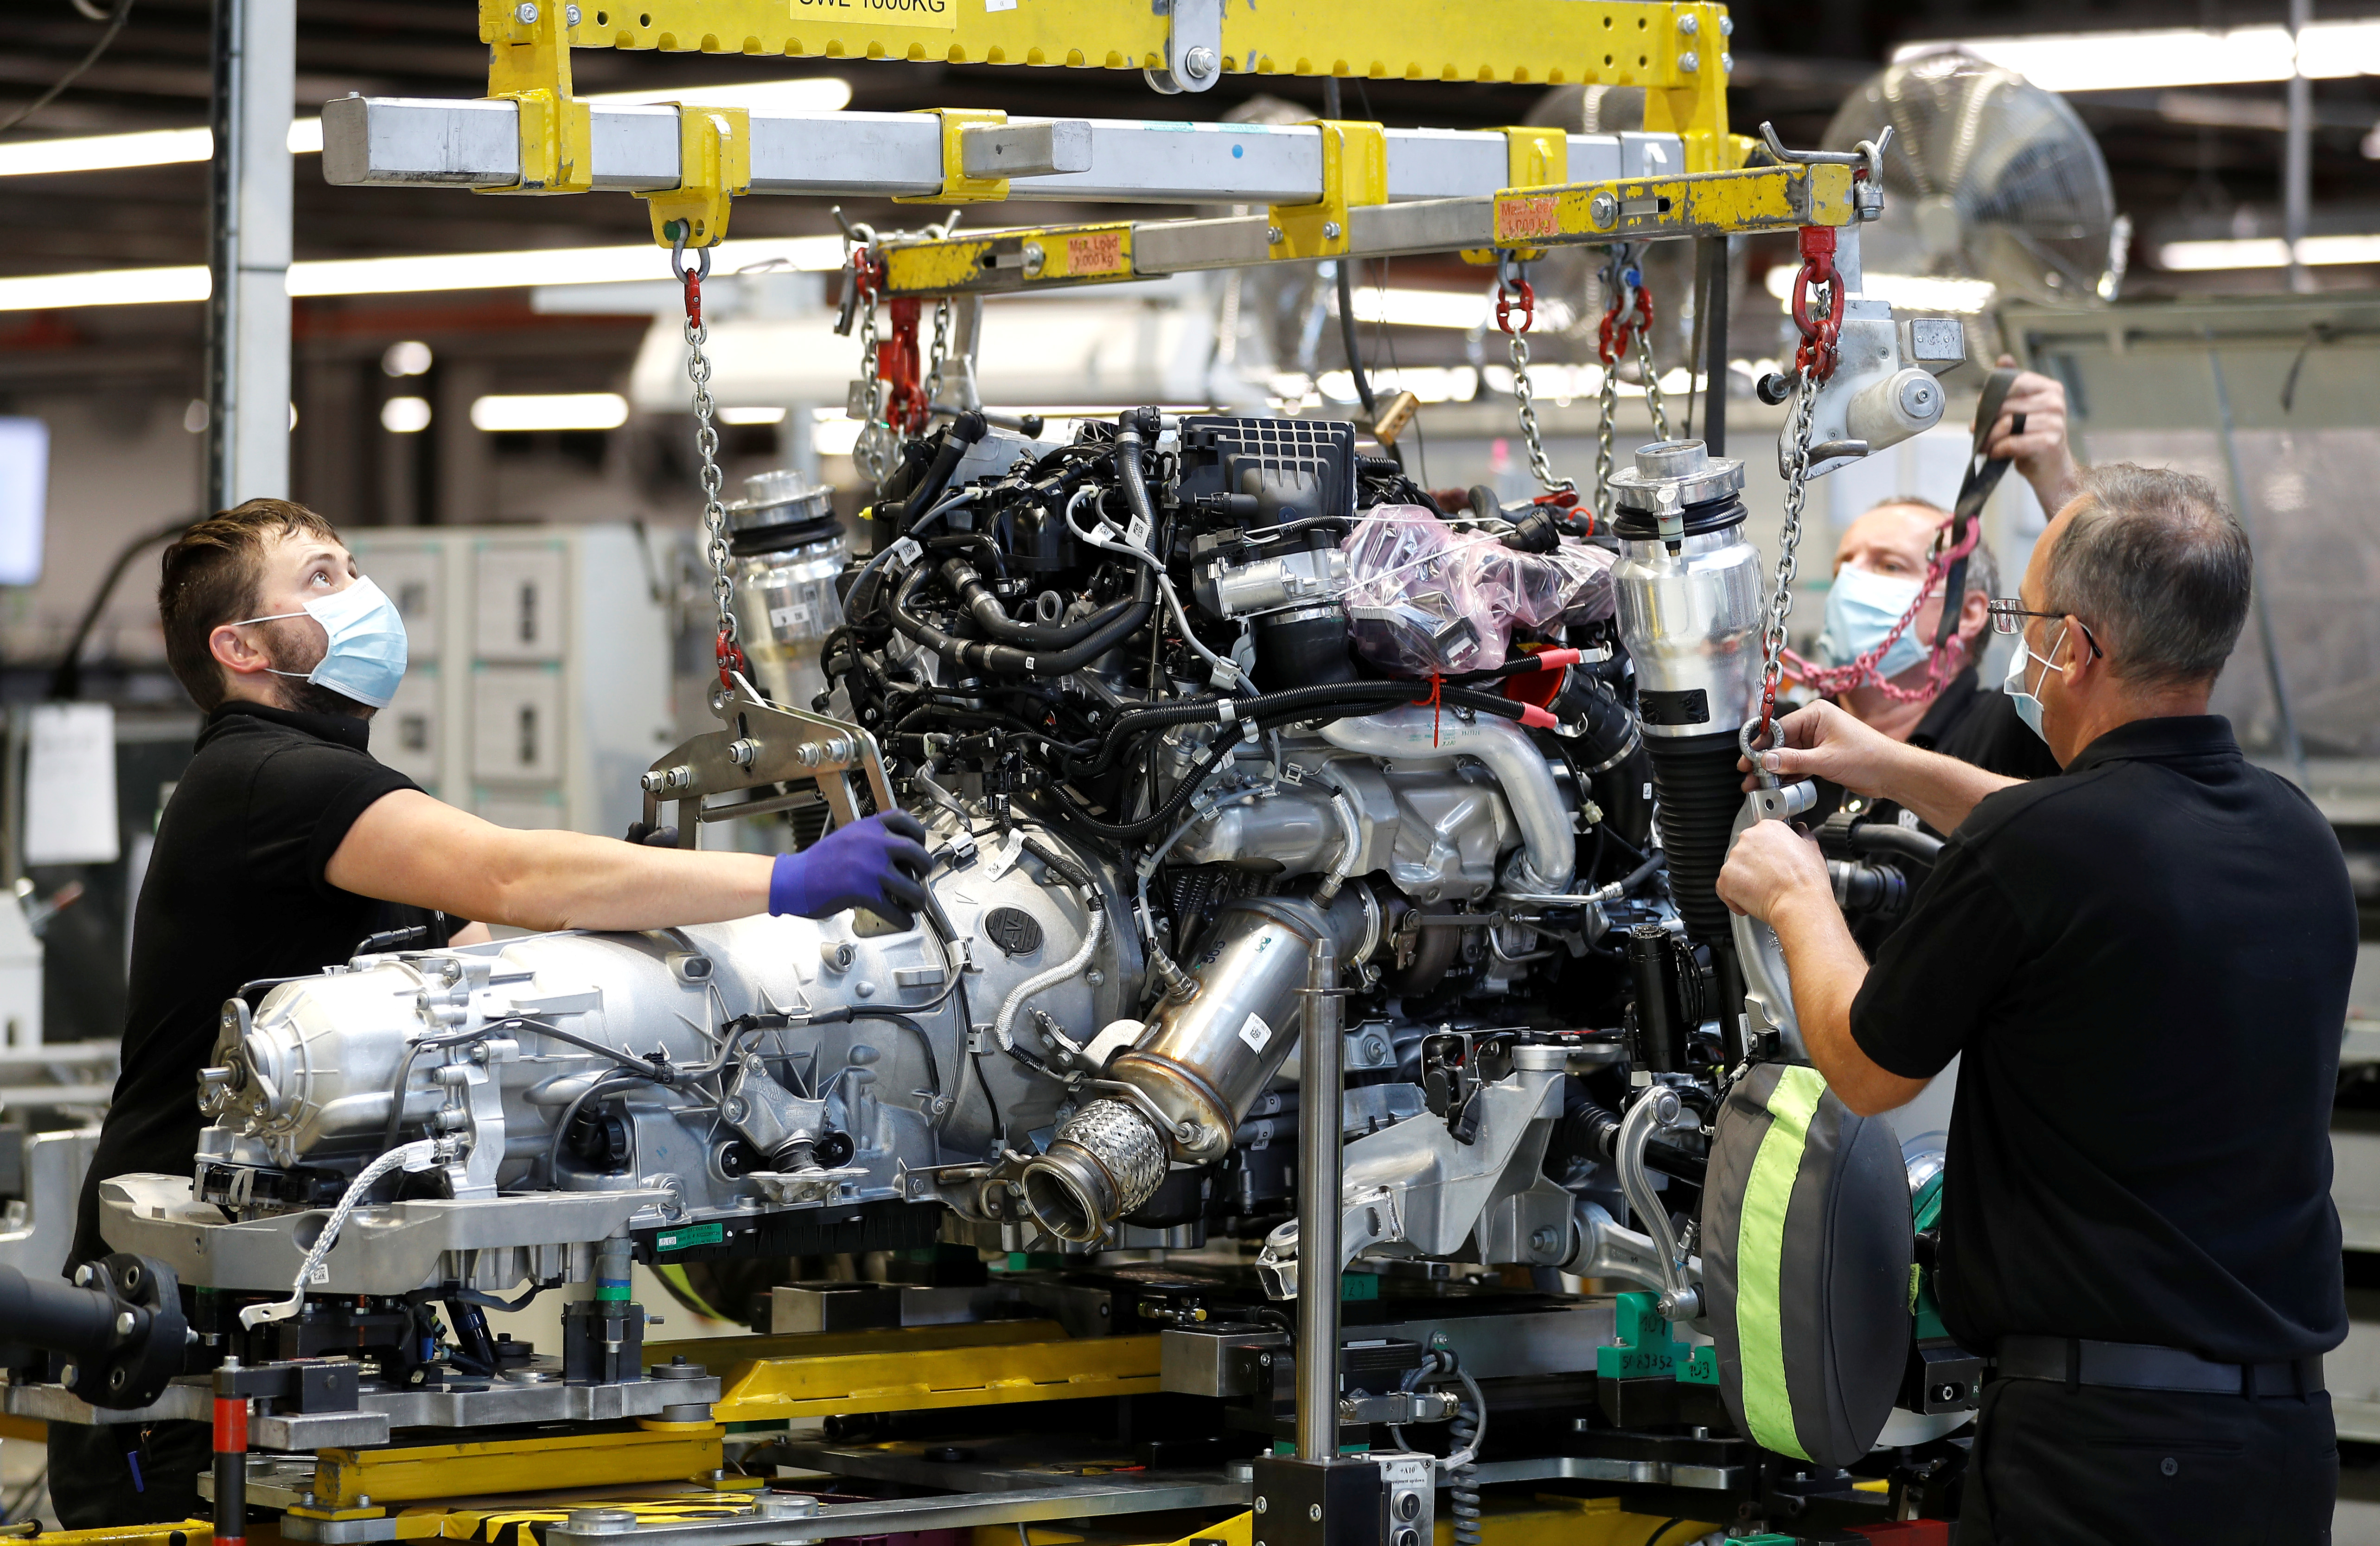 Technicians work on a Rolls-Royce engine prior to it being installed in a car on the production line of the Rolls-Royce Goodwood factory, near Chichester